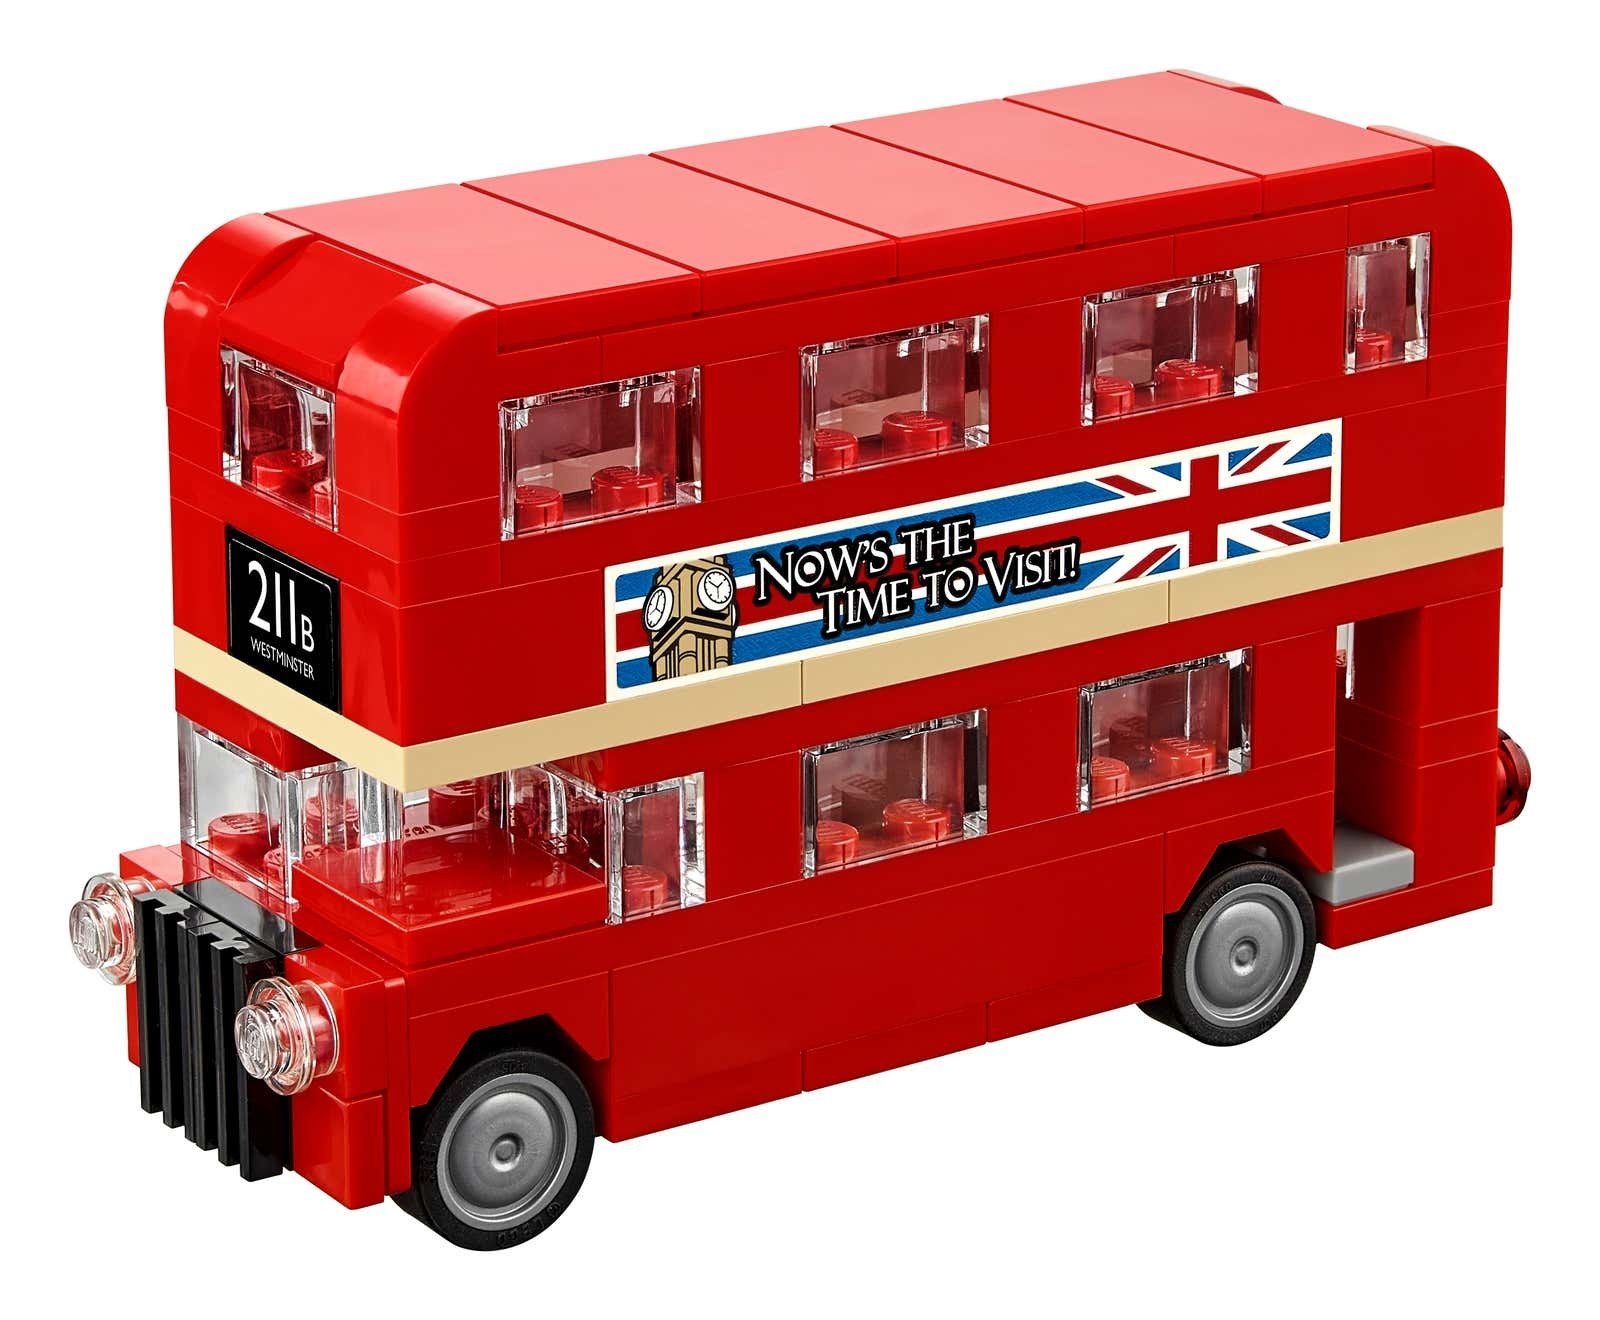 the red double-decker bus